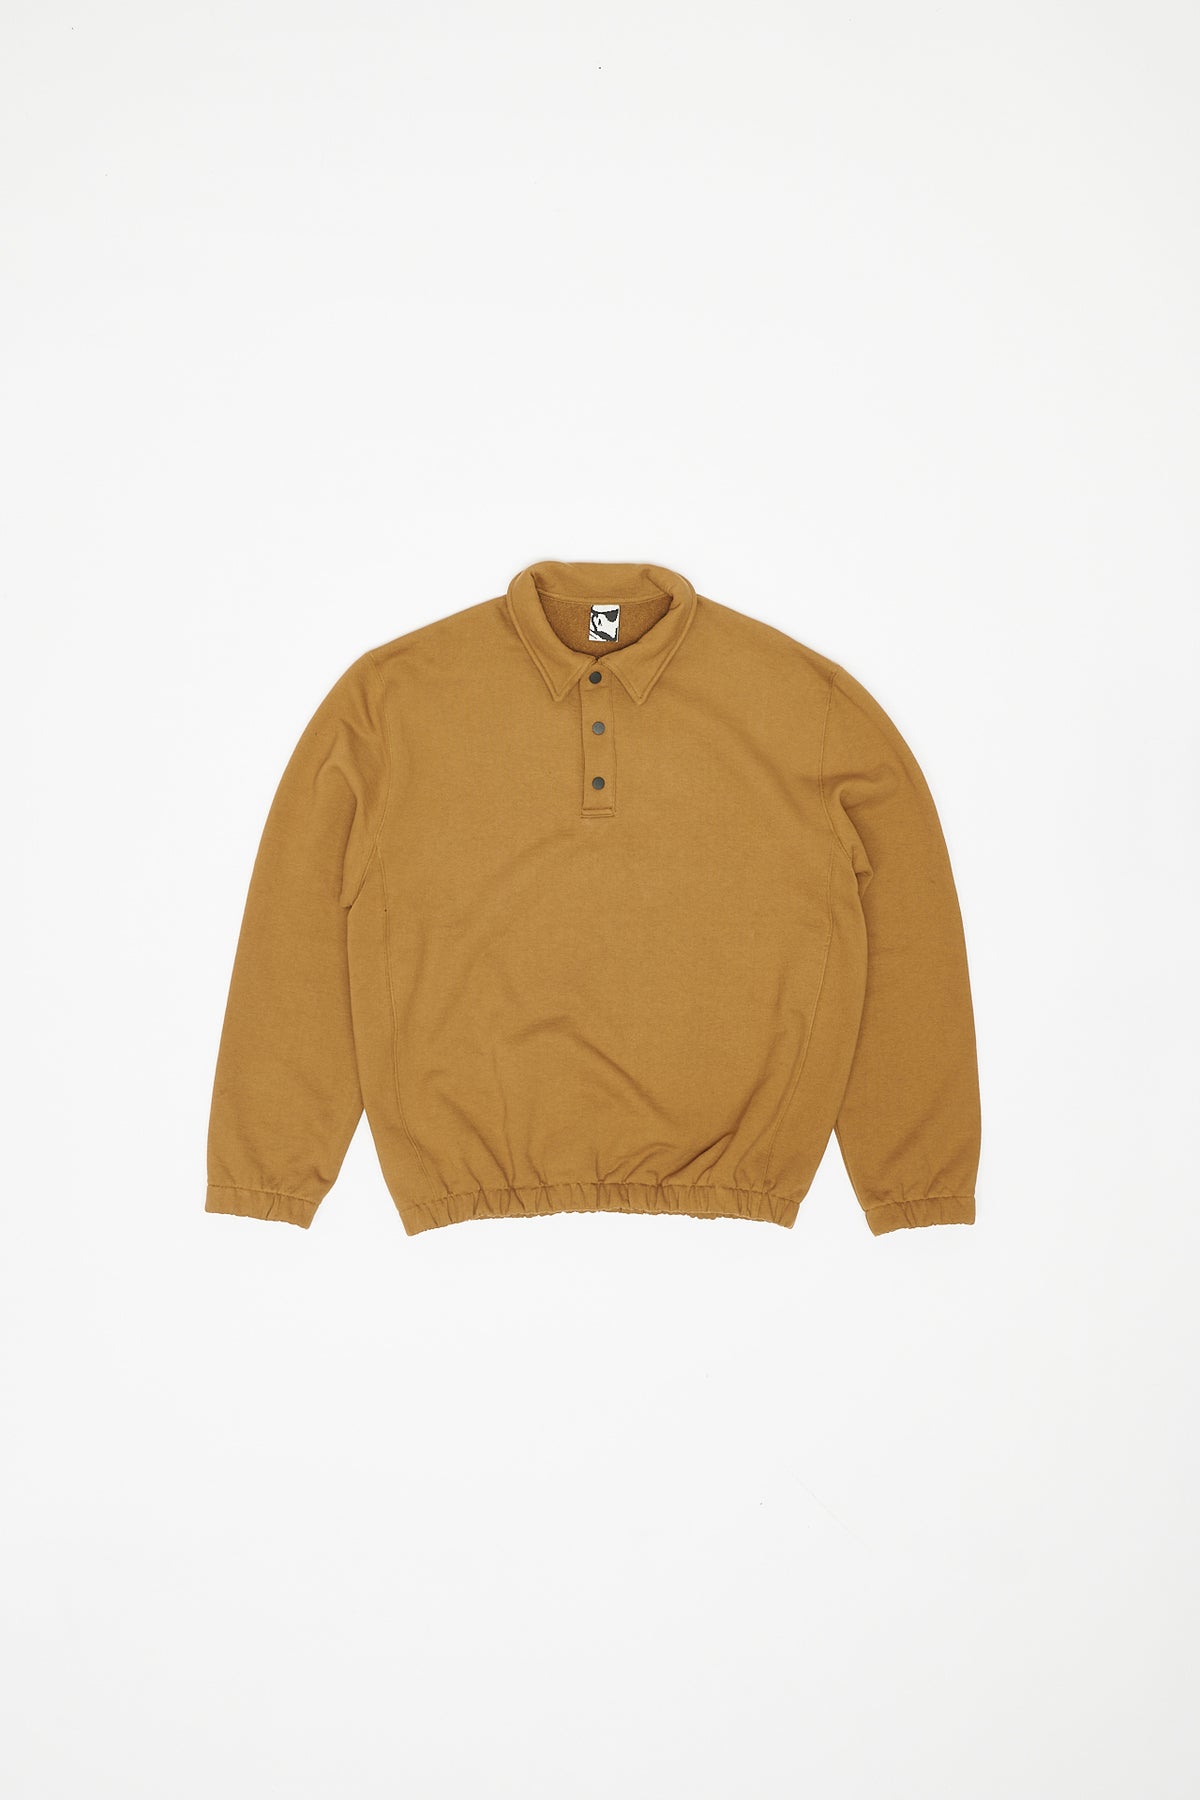 POLO SWEATER - COYOTE